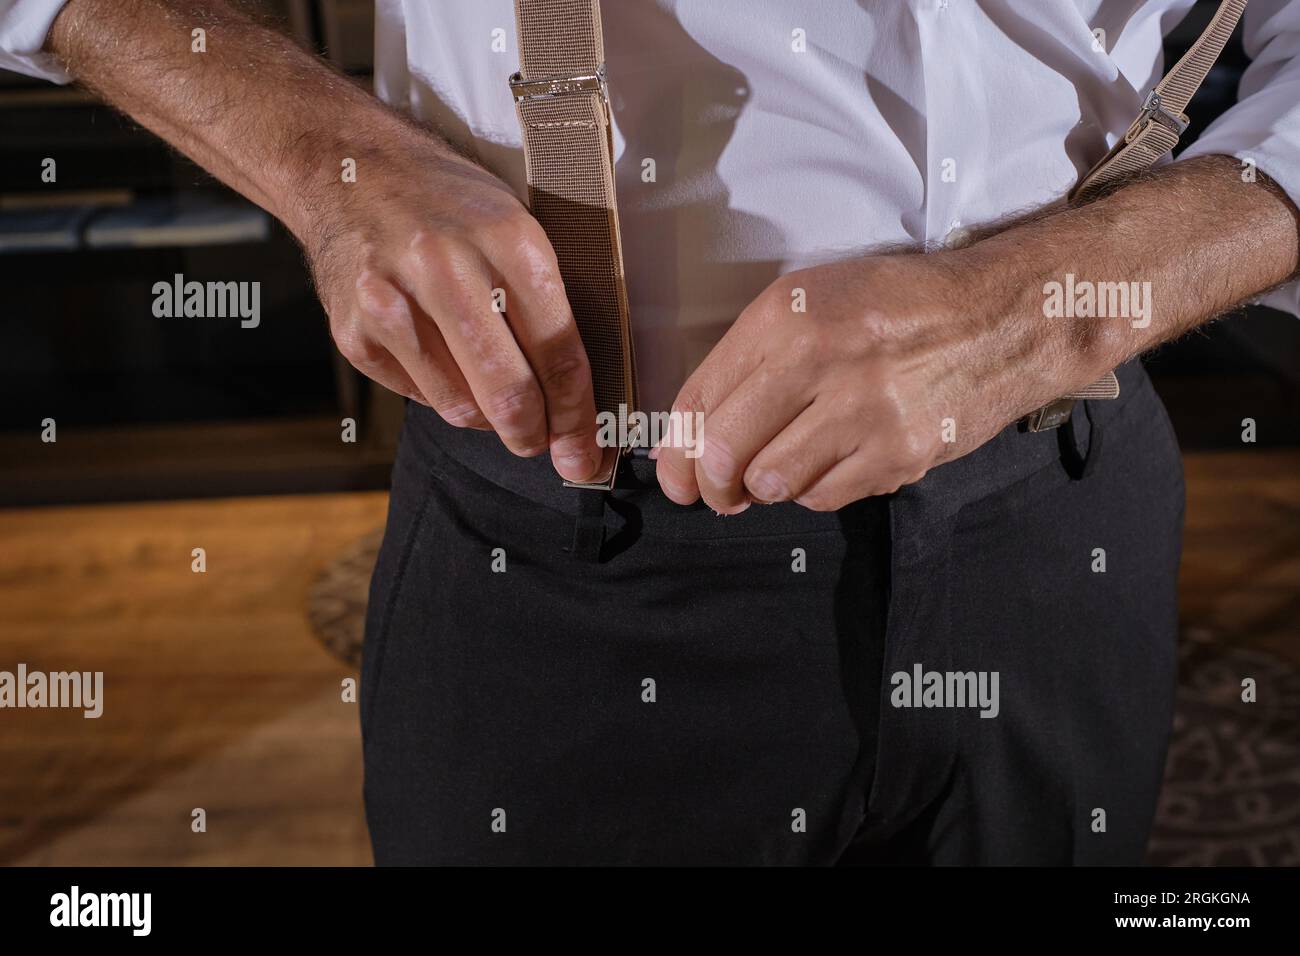 Crop anonymous male model in formal clothes putting on clip suspenders and choosing new outfit while spending time in atelier Stock Photo